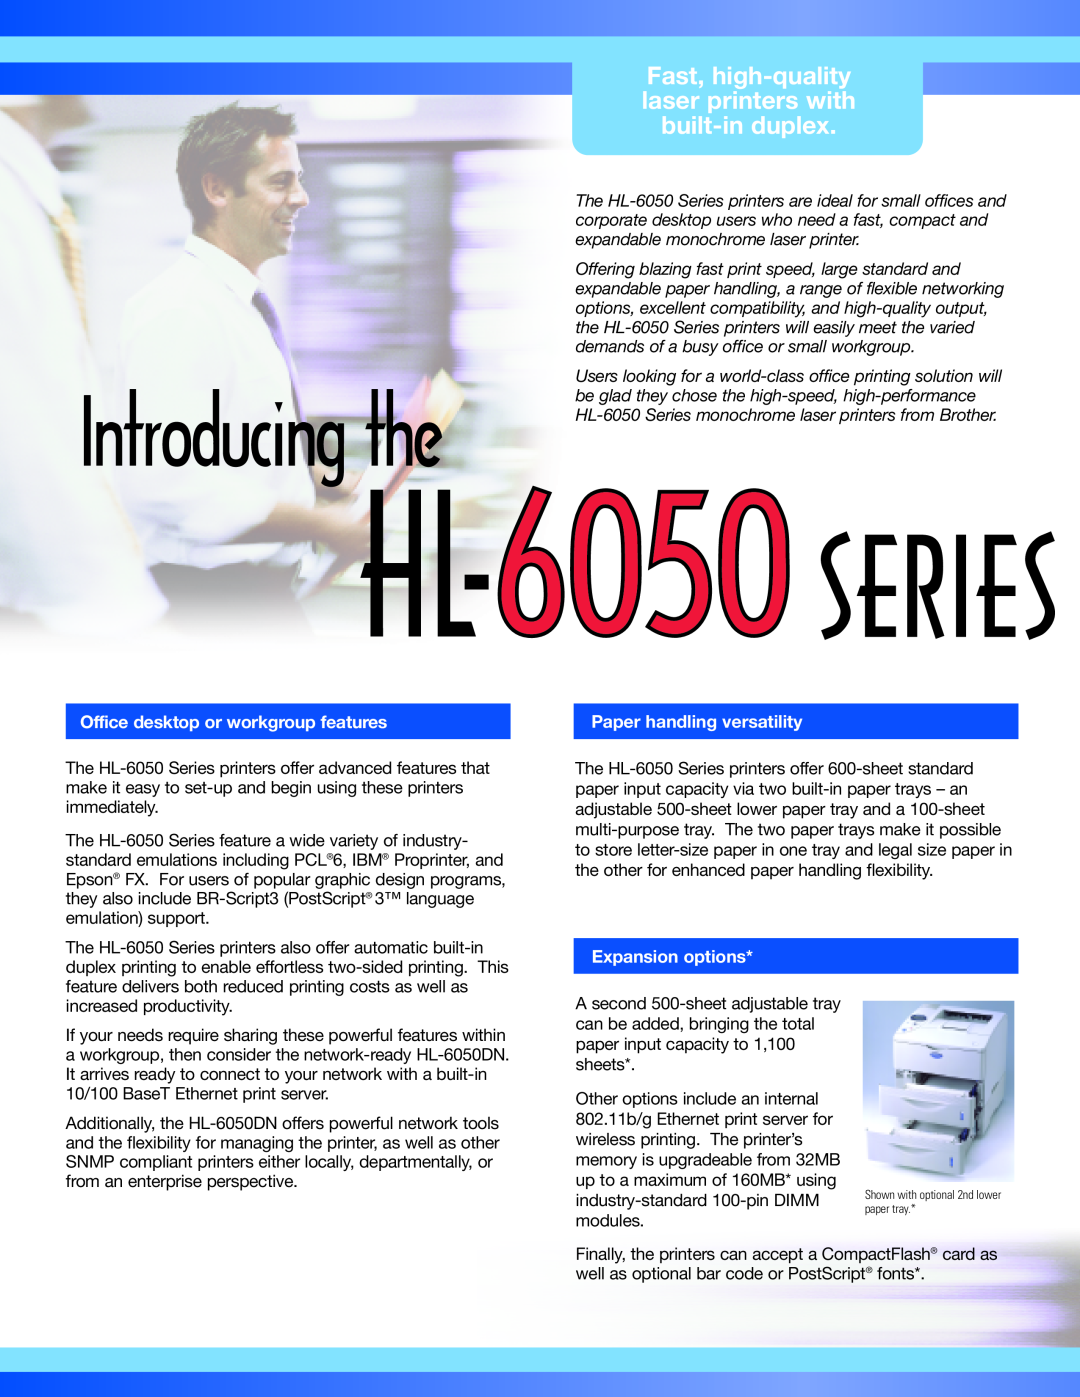 Brother HL-6050 Series Introducing the, Fast, high-quality laser printers with built-in duplex, Paper handling versatility 